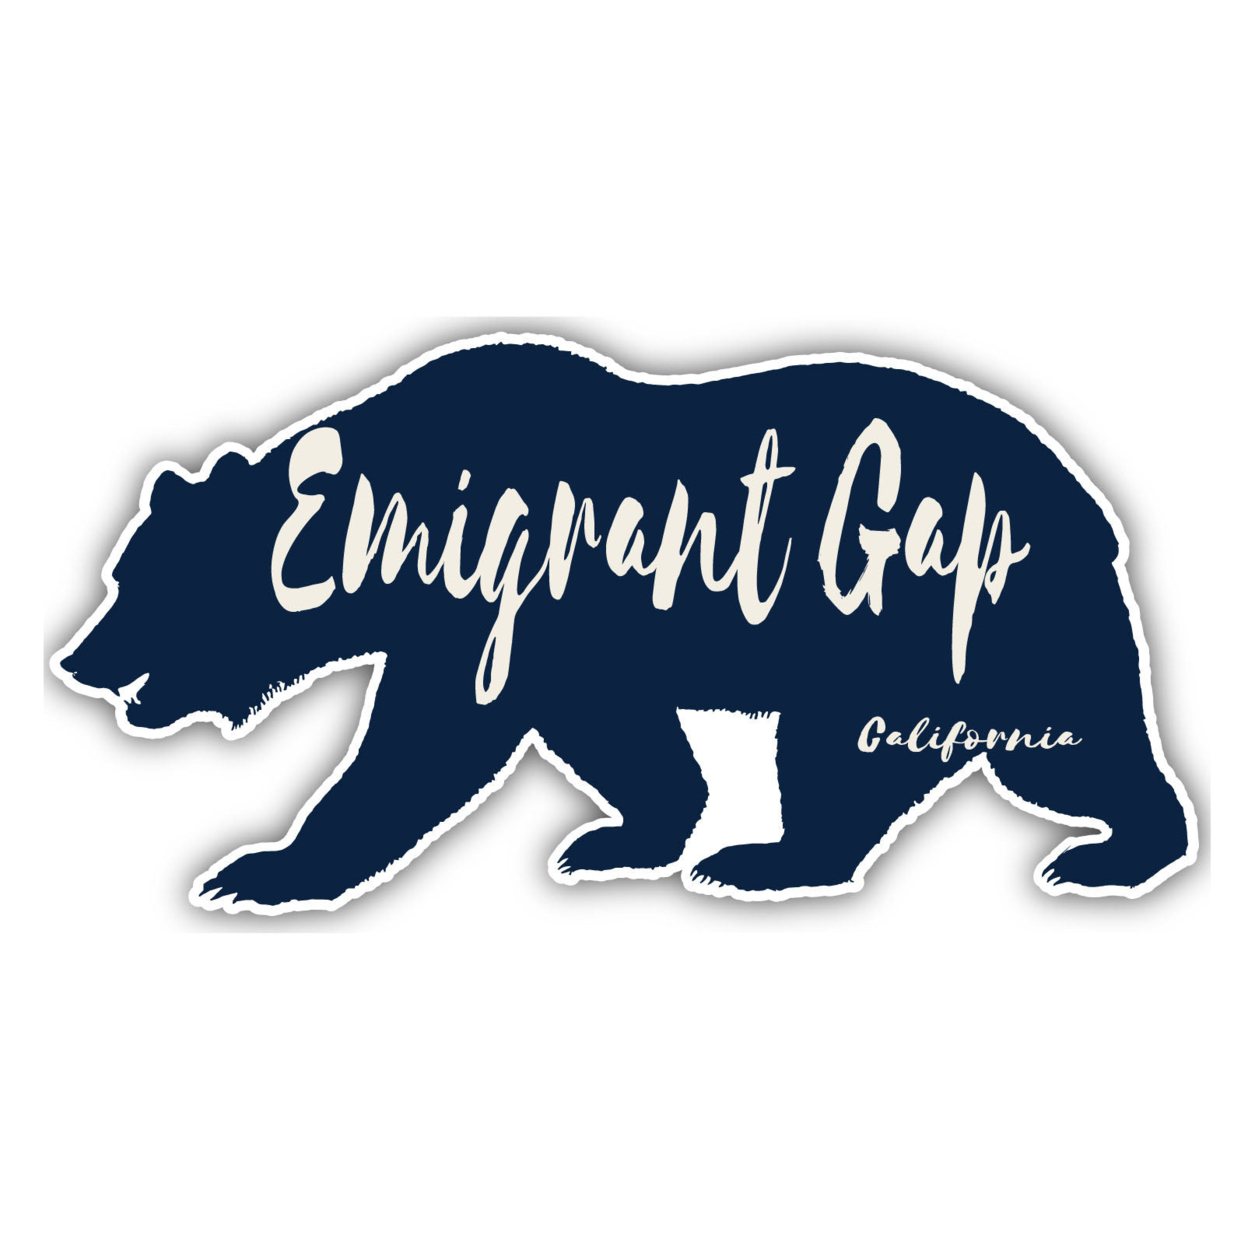 Emigrant Gap California Souvenir Decorative Stickers (Choose Theme And Size) - 4-Pack, 10-Inch, Great Outdoors